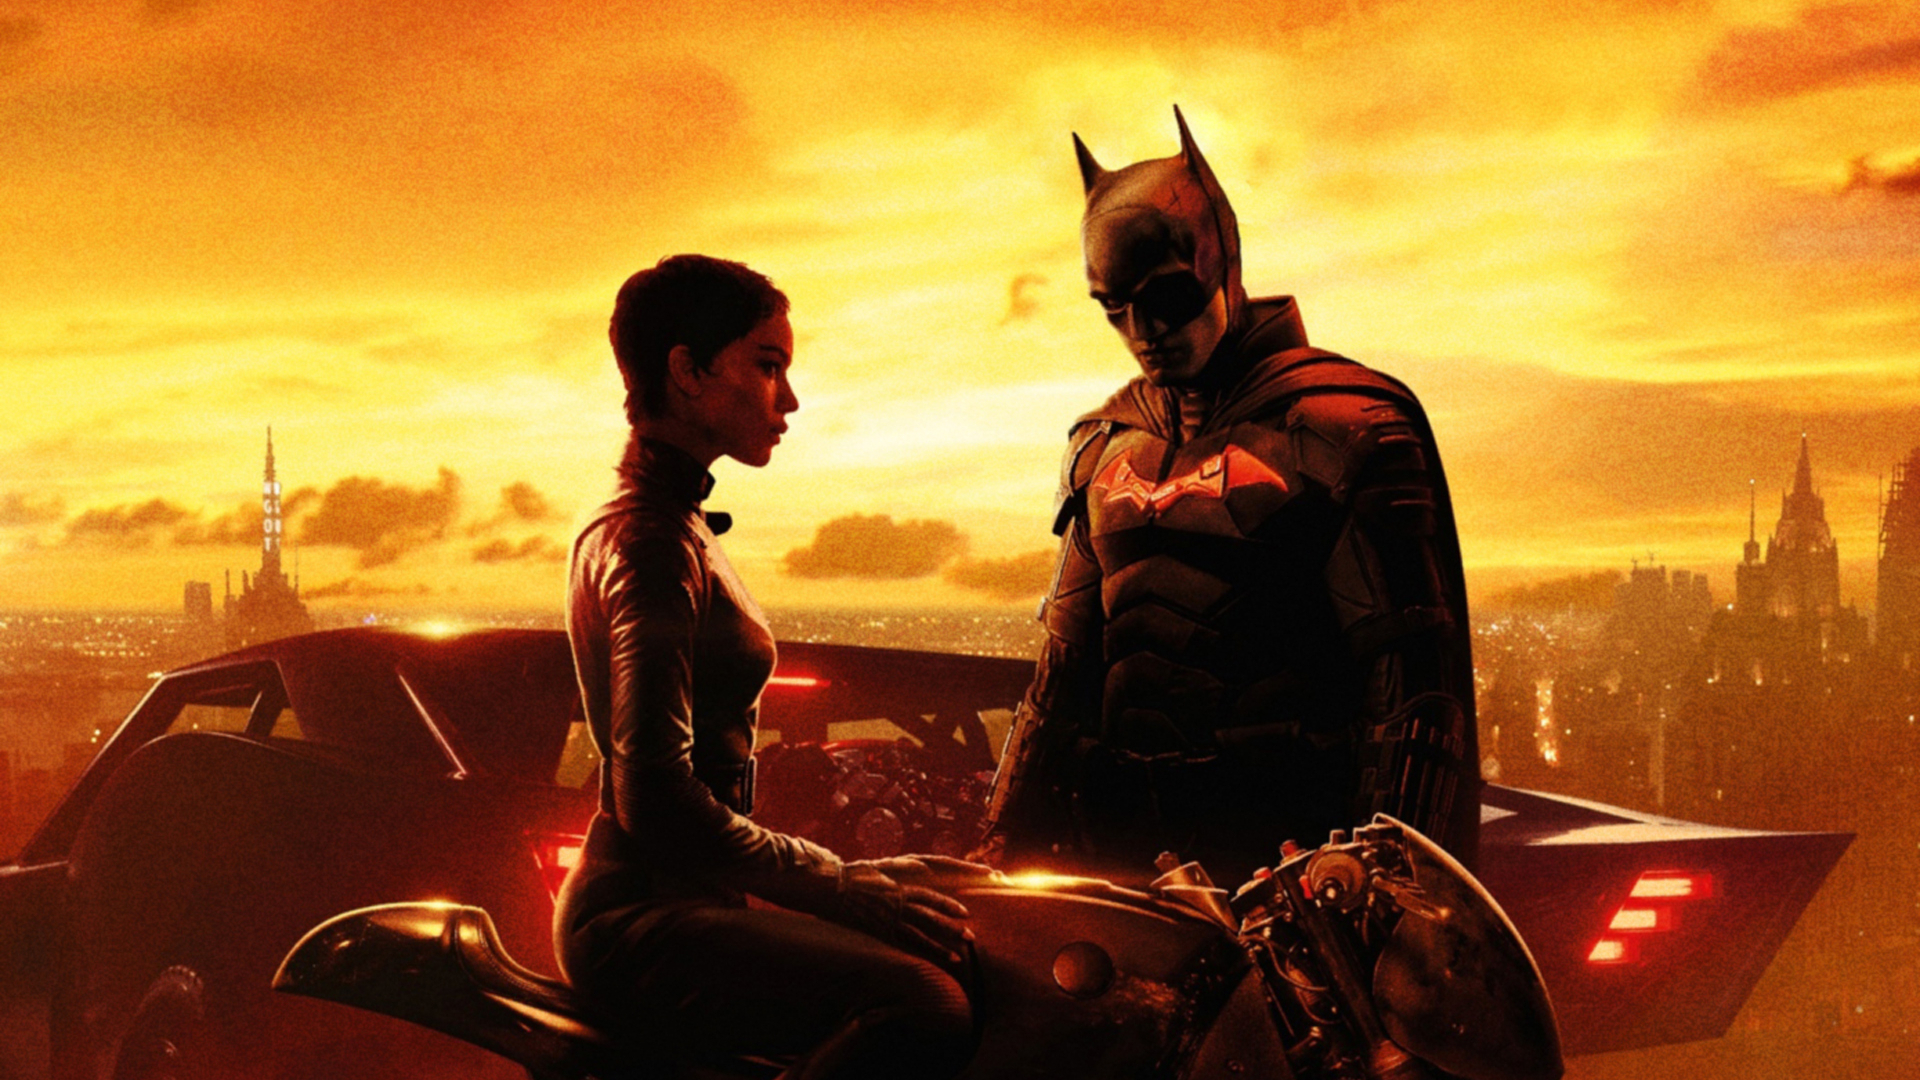 1920x1080 Resolution The Batman And The Catwoman 1080p Laptop Full Hd